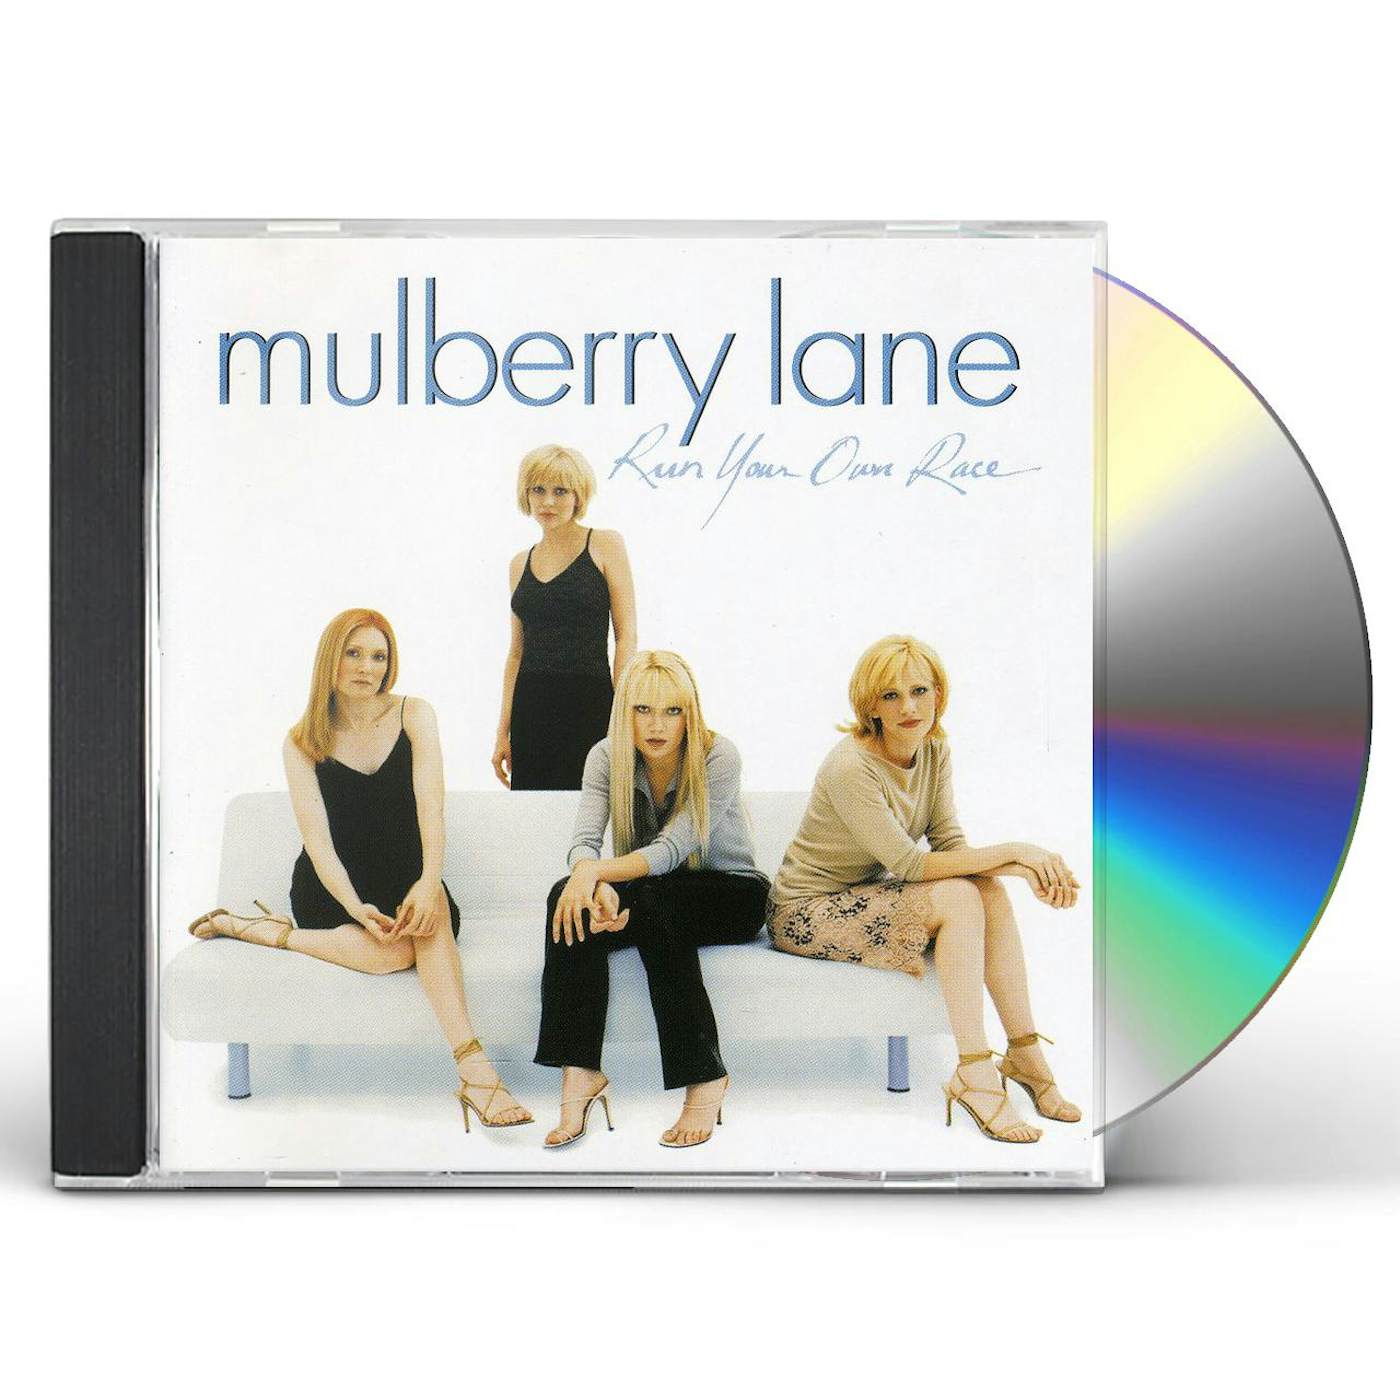 Mulberry Lane RUN YOUR OWN RACE CD